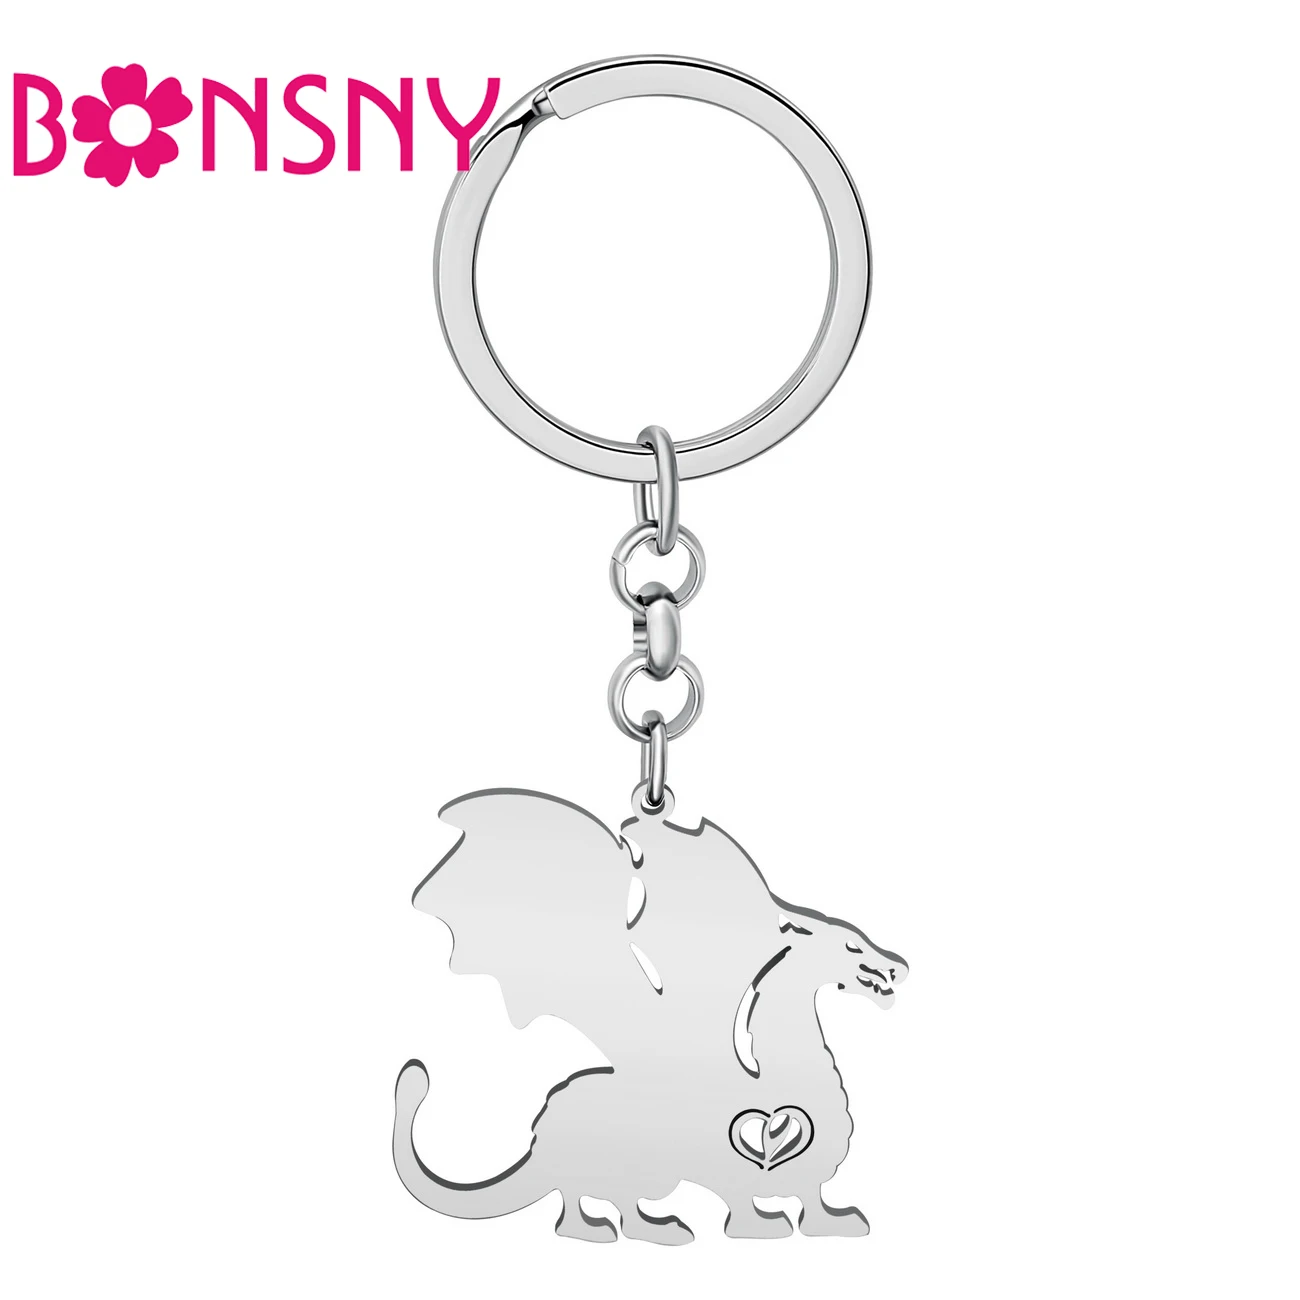 

Bonsny Stainless Steel Silver-plated Roaring Dinosaur Dragon Keychains Car Key Bag Fashion Jewelry For Women Girls Teens Gift